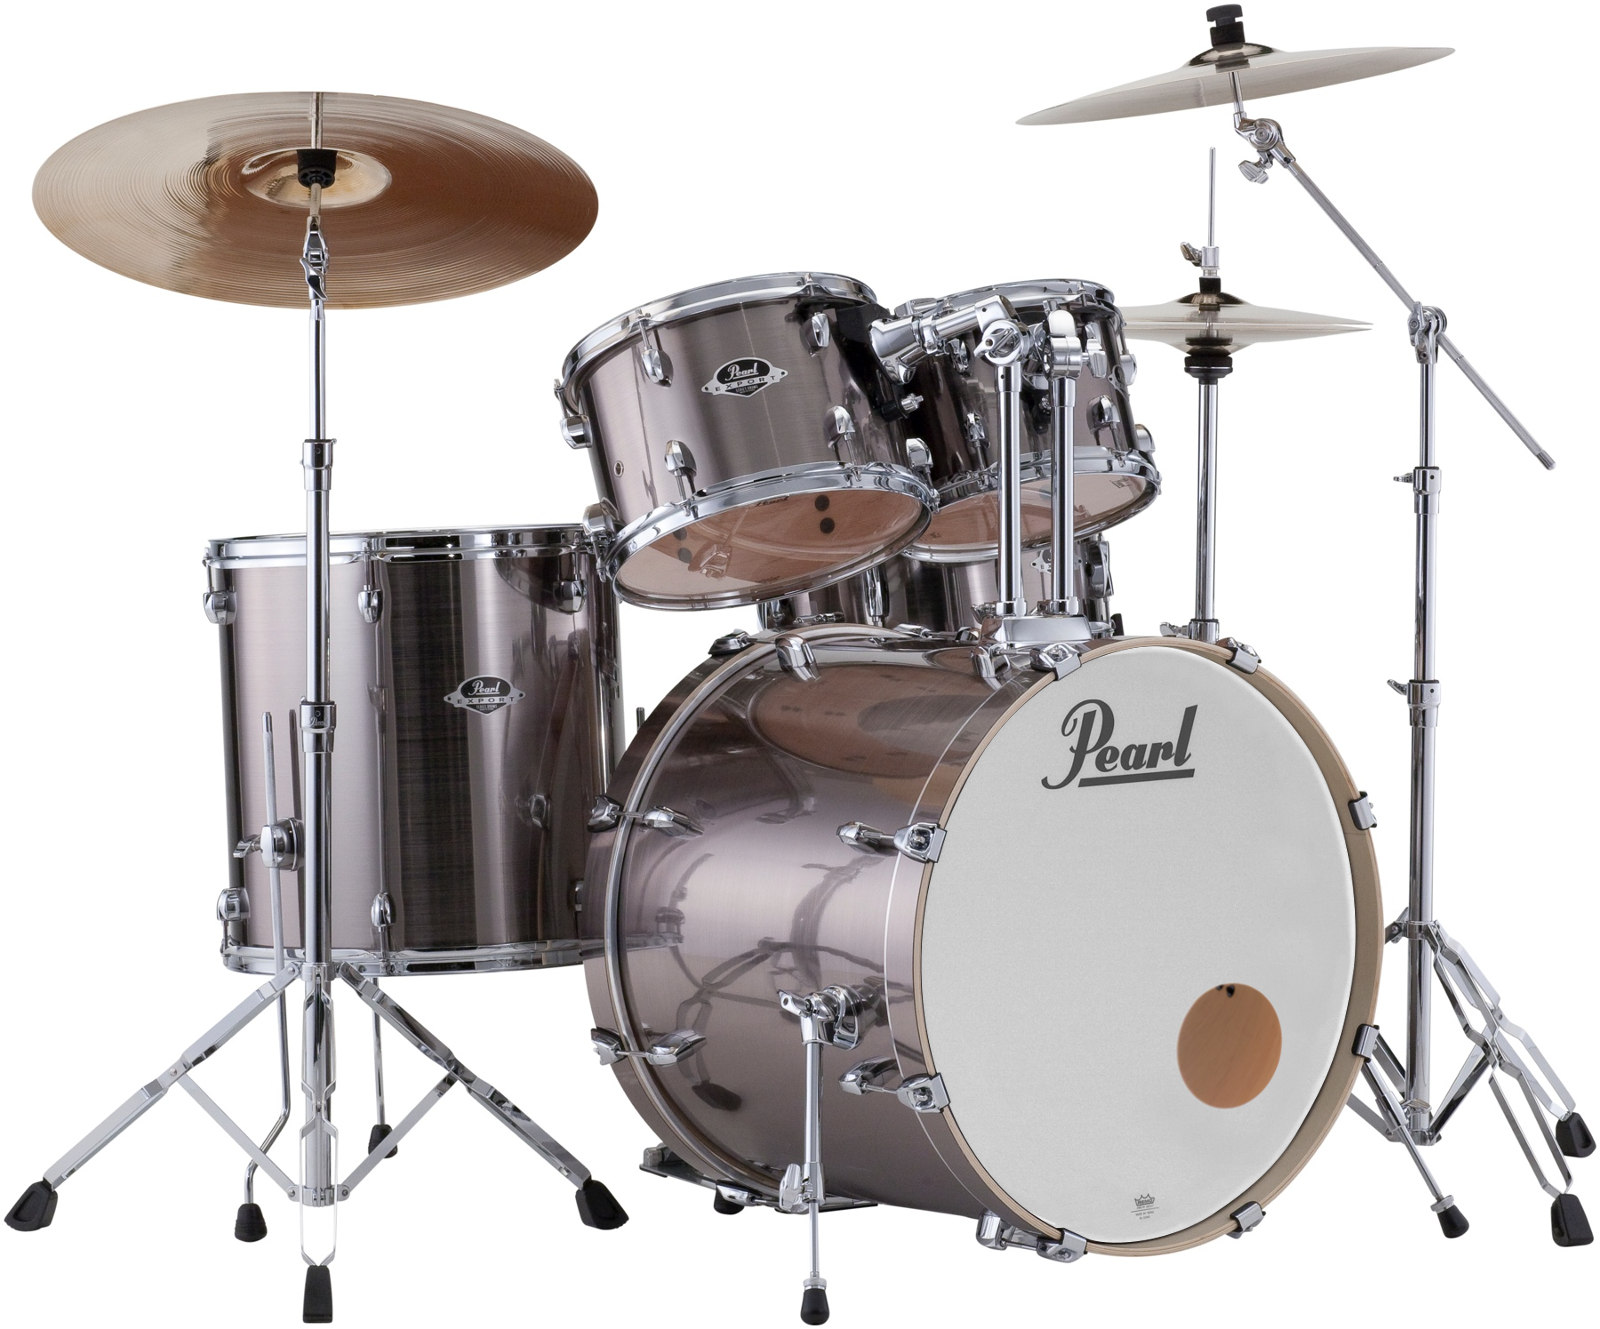 PEARL DRUMS EXPORT FUSION 20 SMOKEY CHROME